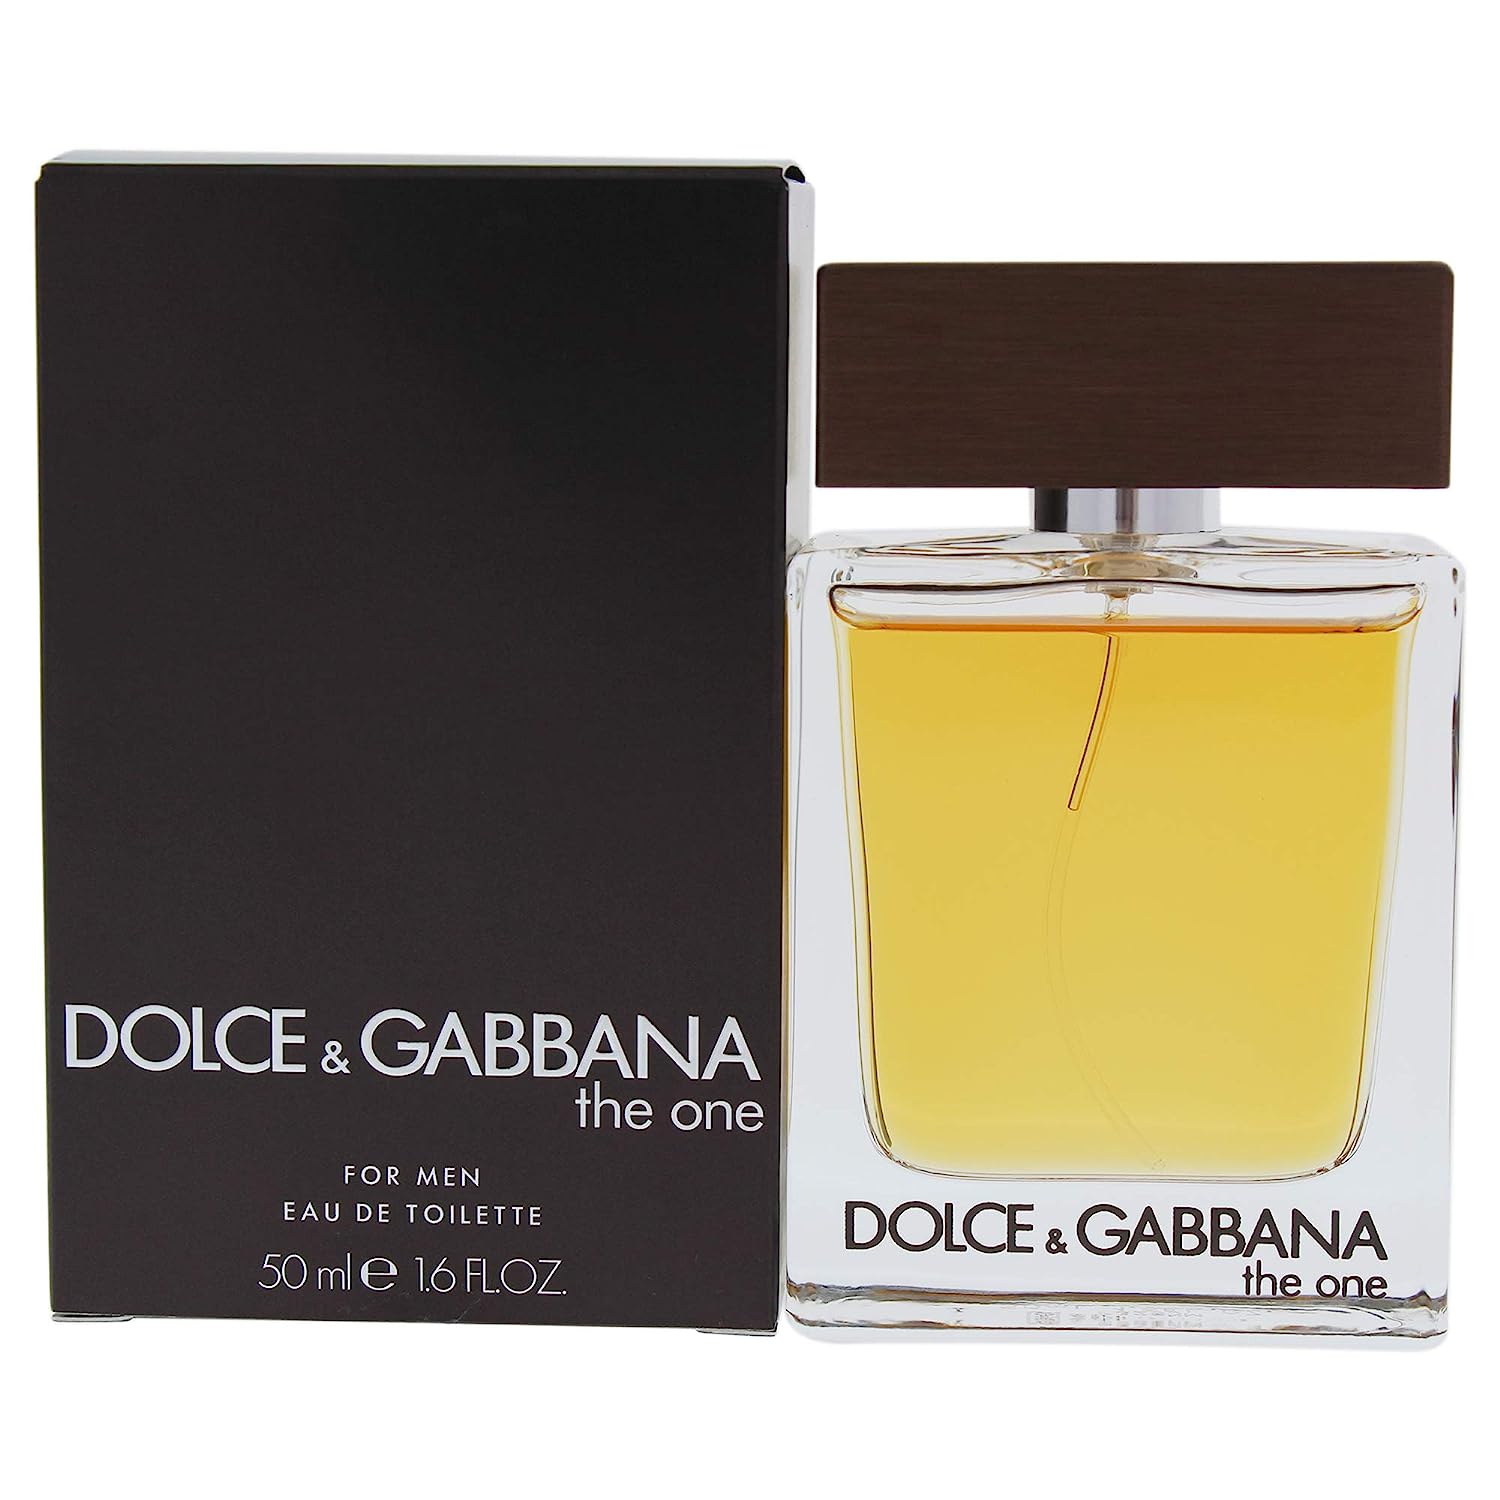 DOLCE & GABBANA THE ONE FOR MEN (M) EDT 50ML - Intense oud